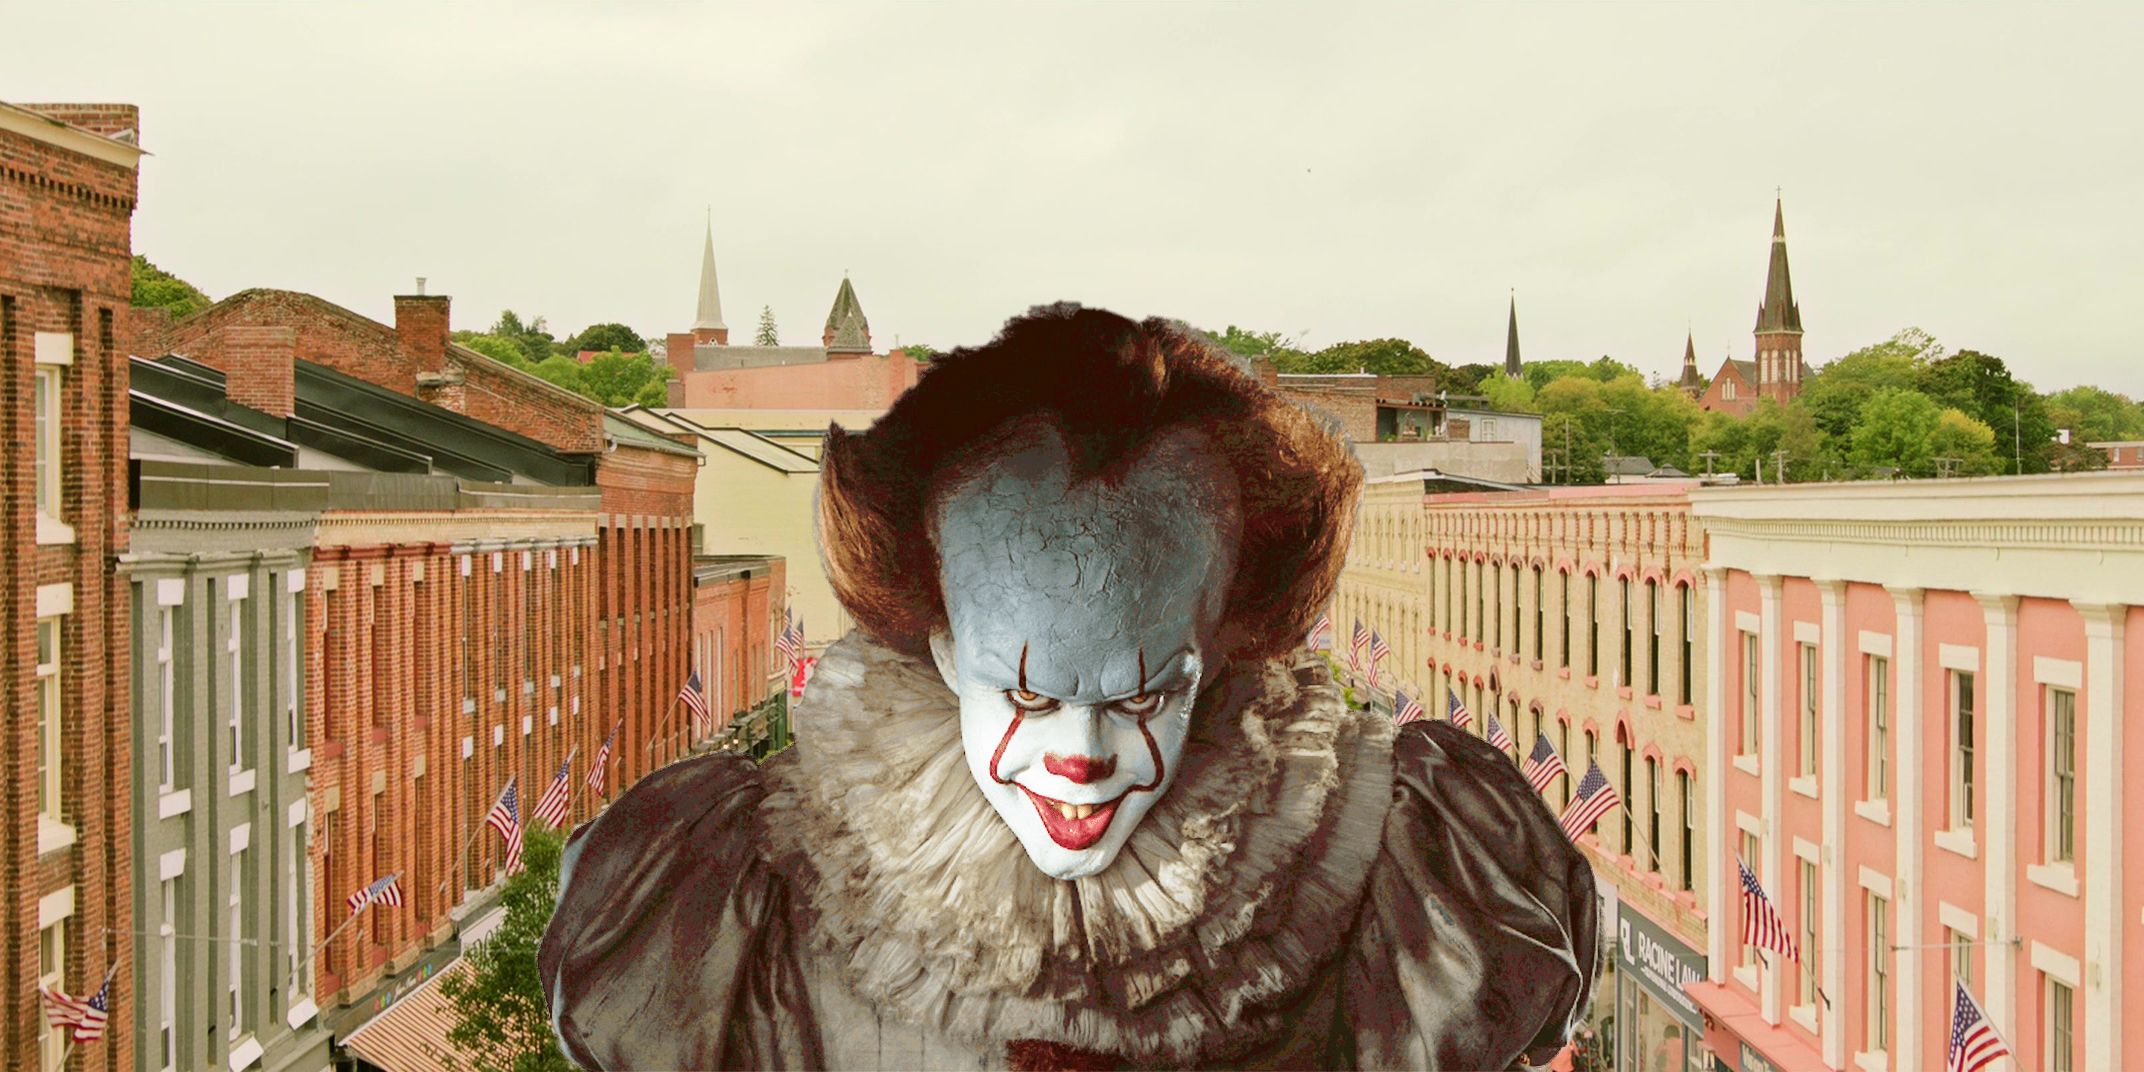 IT - Derry and Pennywise